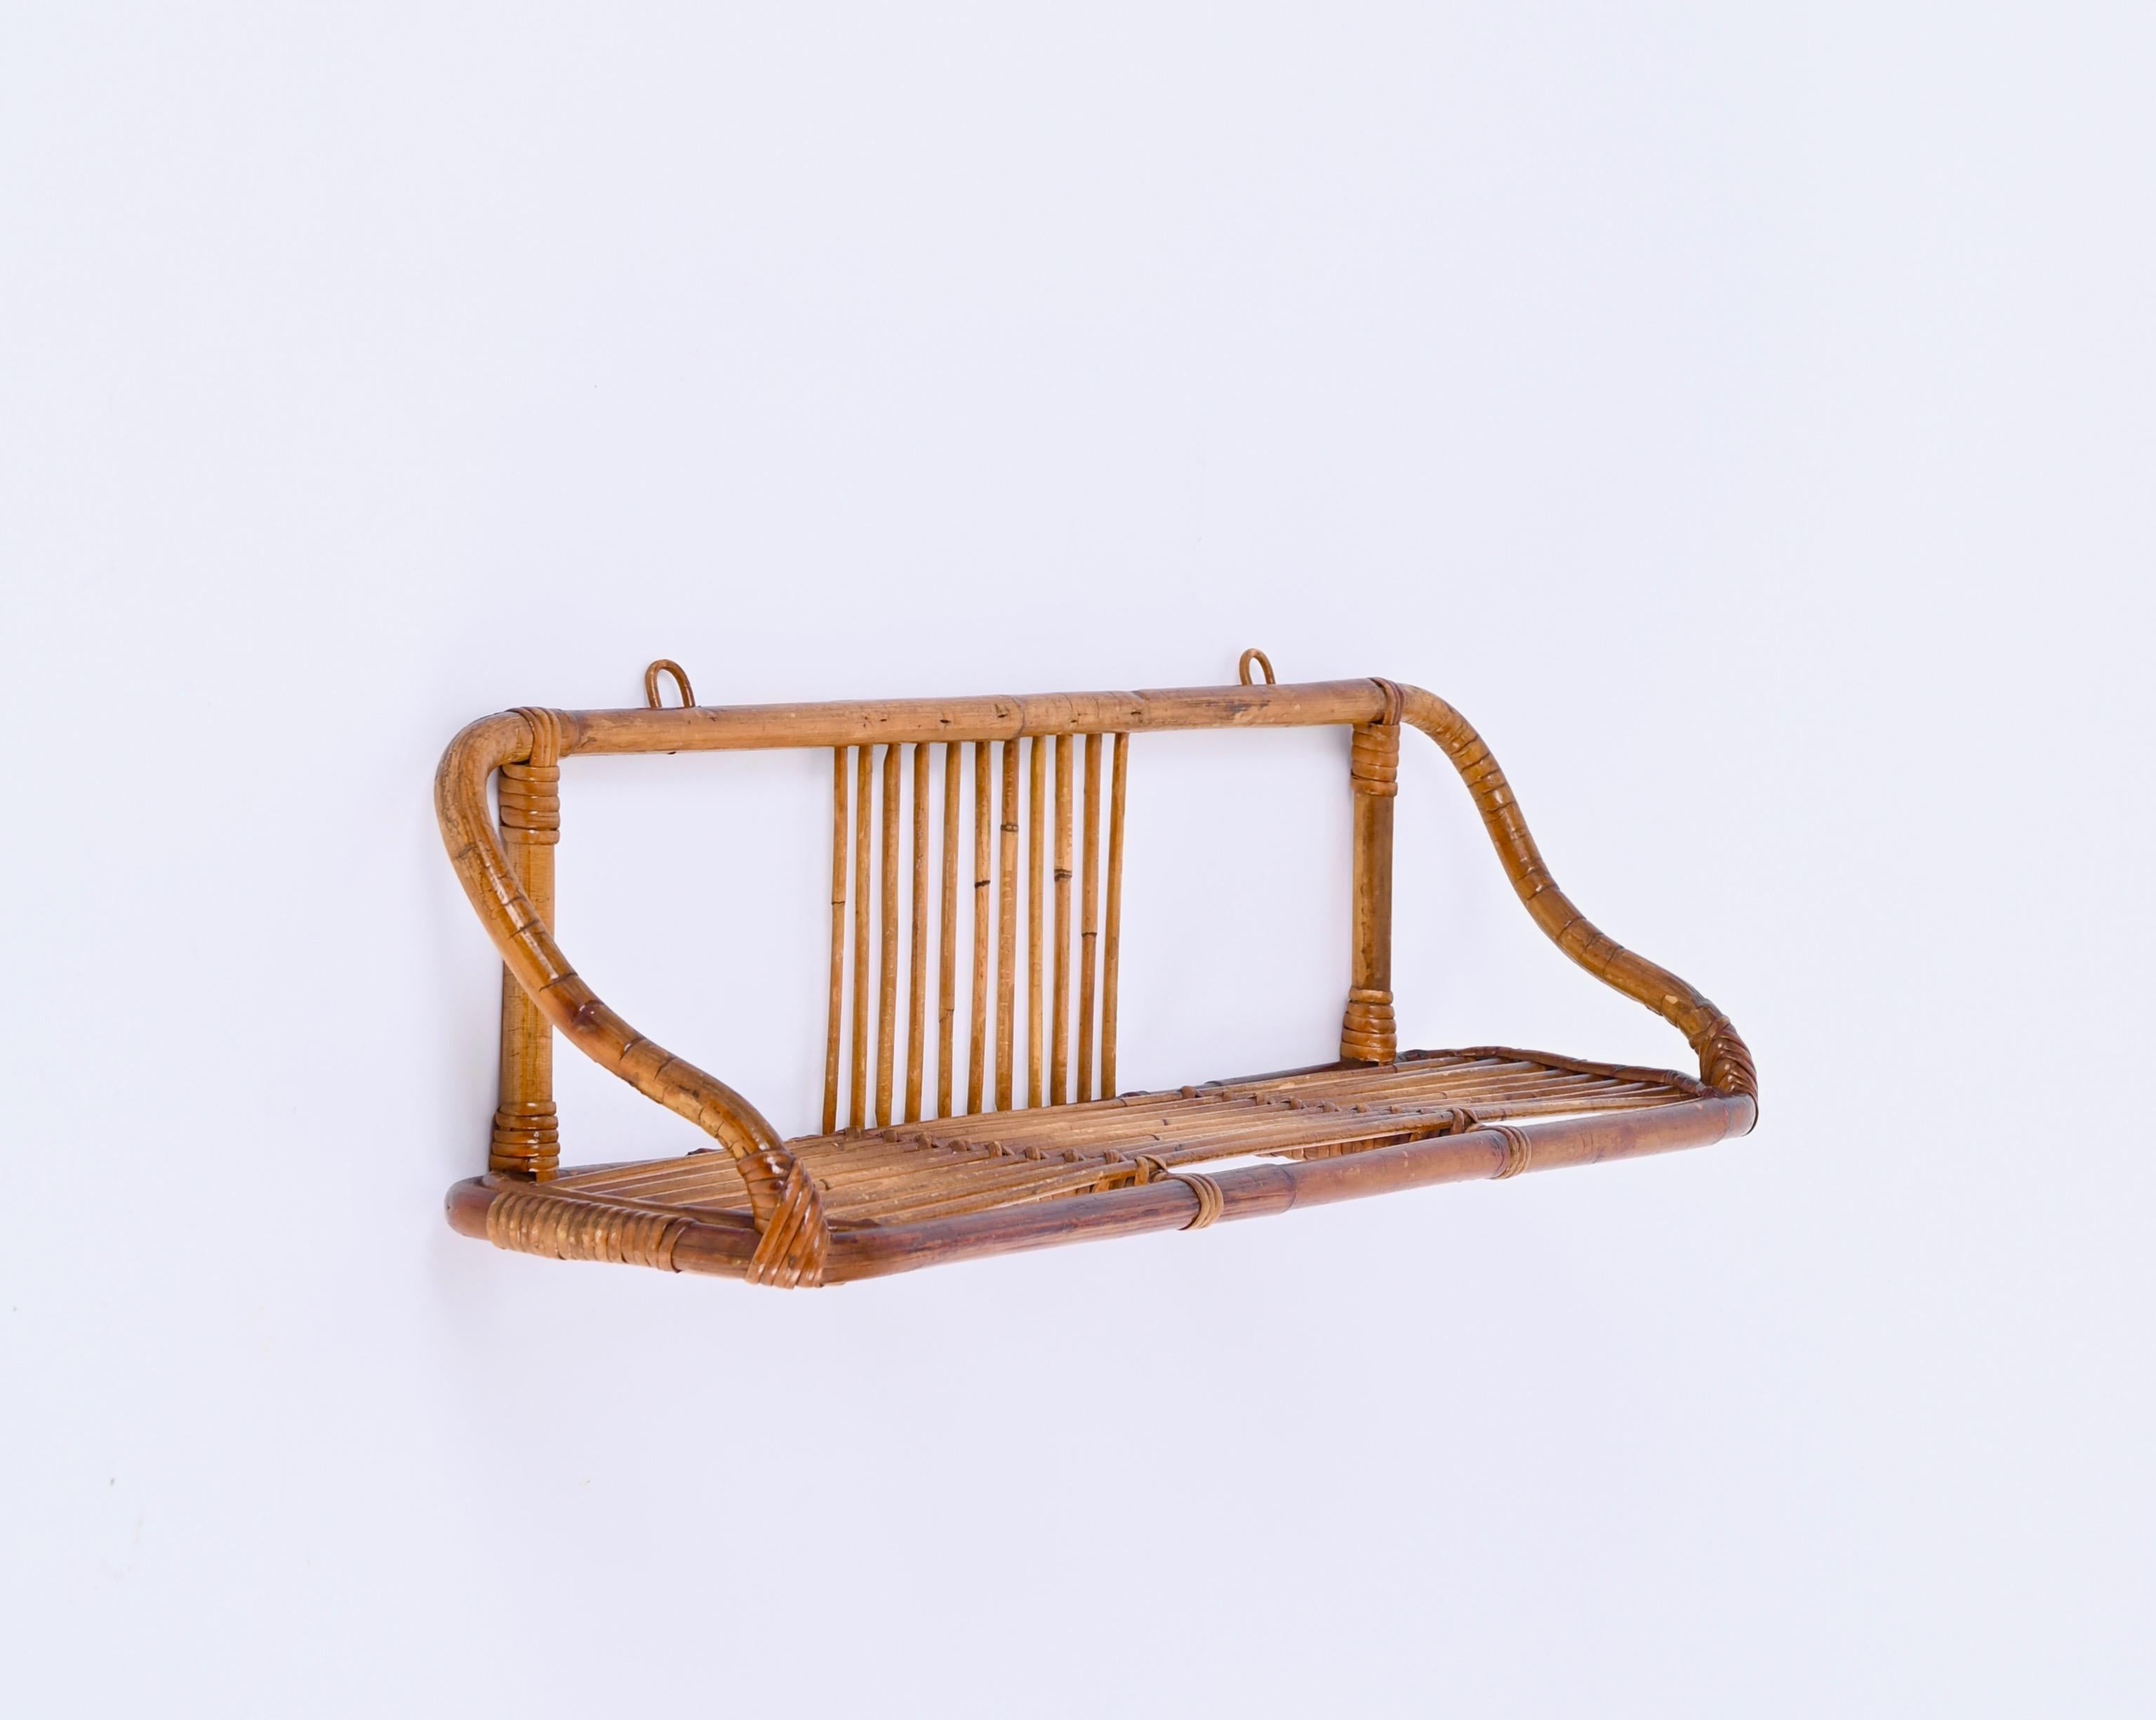  French Riviera Mid-Century Wall Shelf in Rattan and Bamboo, Italy, 1960s For Sale 4